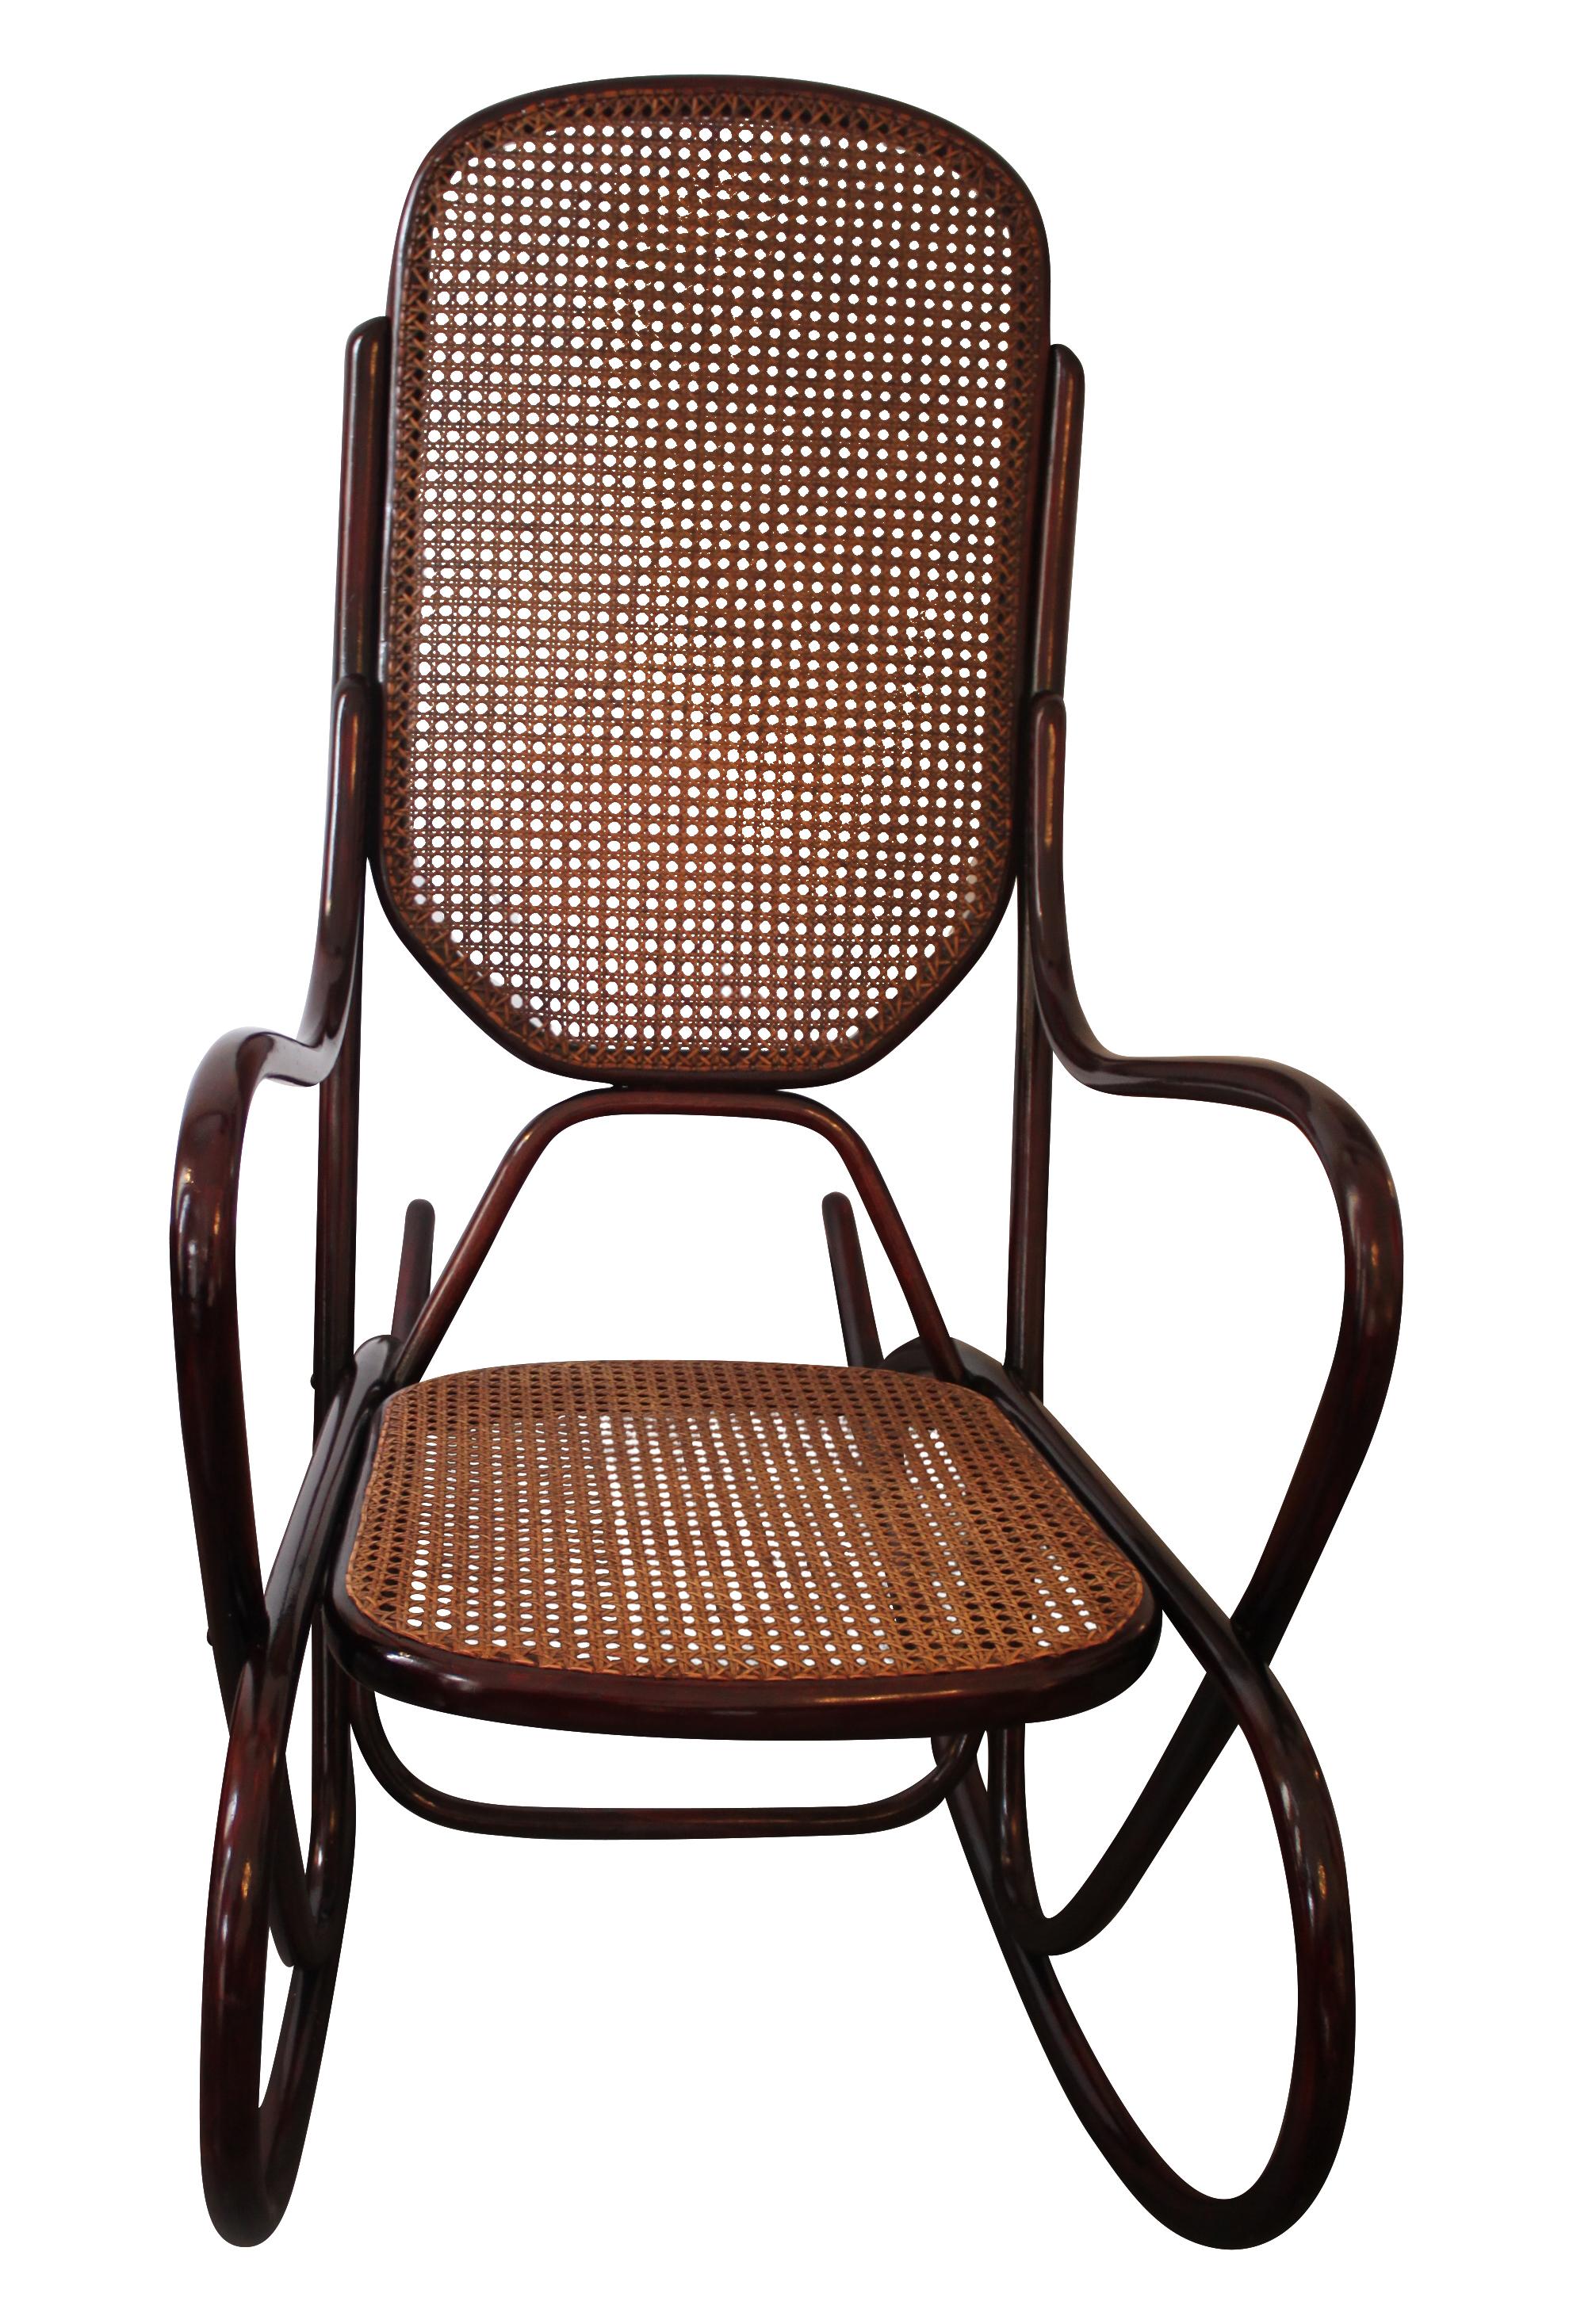 20th Century Vintage Model 7091 Rocking Chair from Thonet For Sale